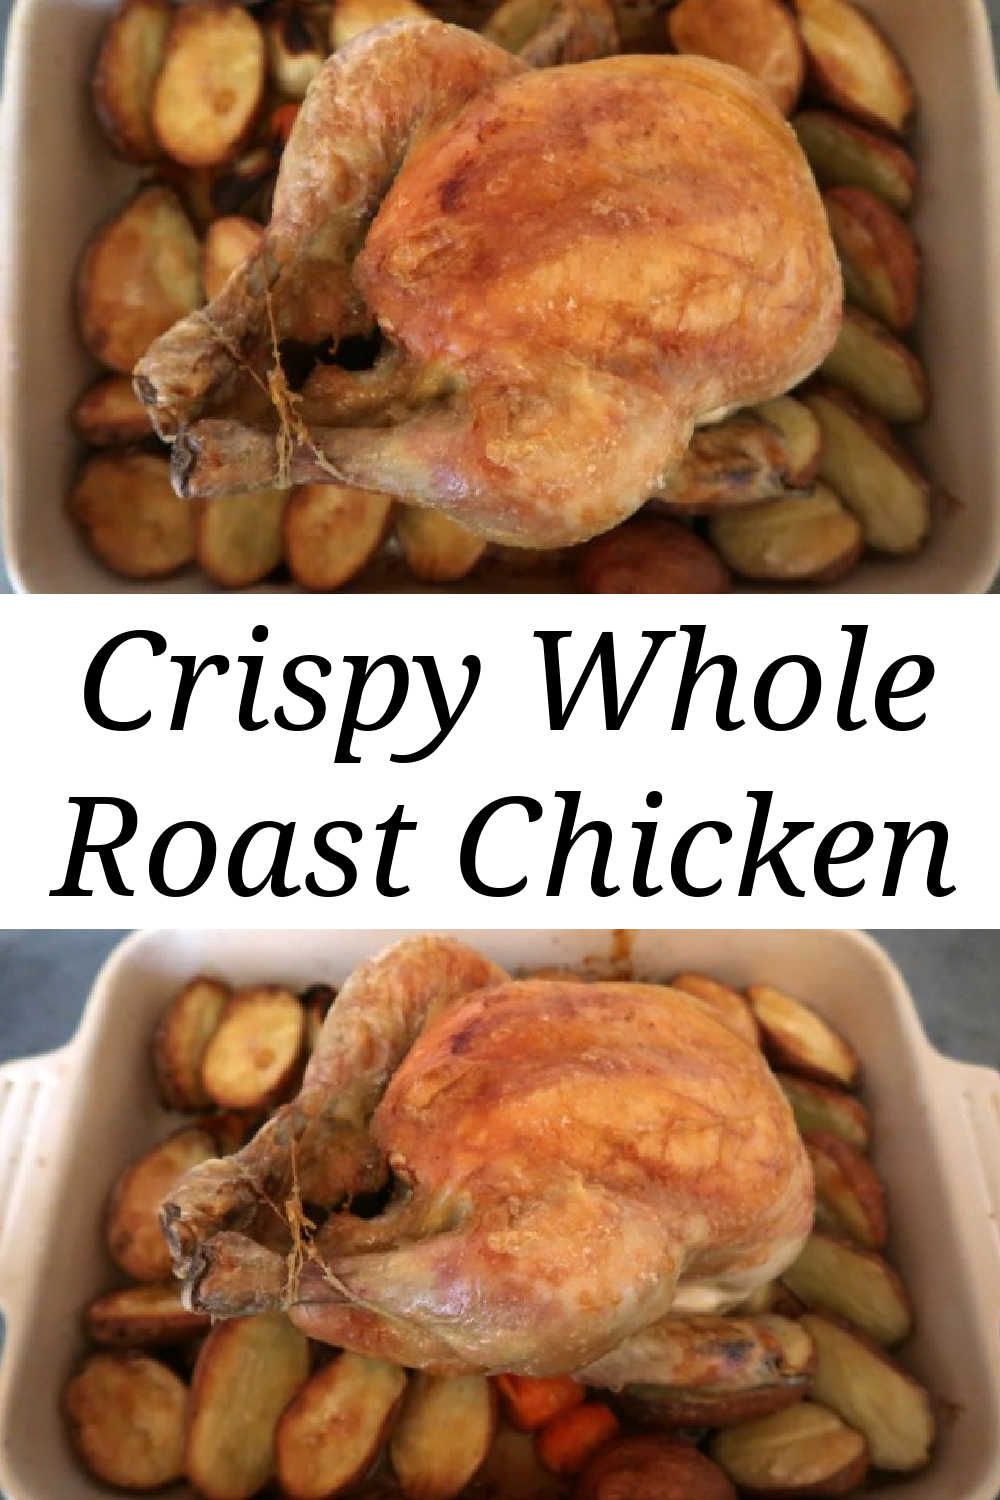 Roast Chicken With Potatoes and Carrots Recipe - How to make a crispy oven roasted whole chicken and vegetables in one pan with ideas for easy sides with dinner.